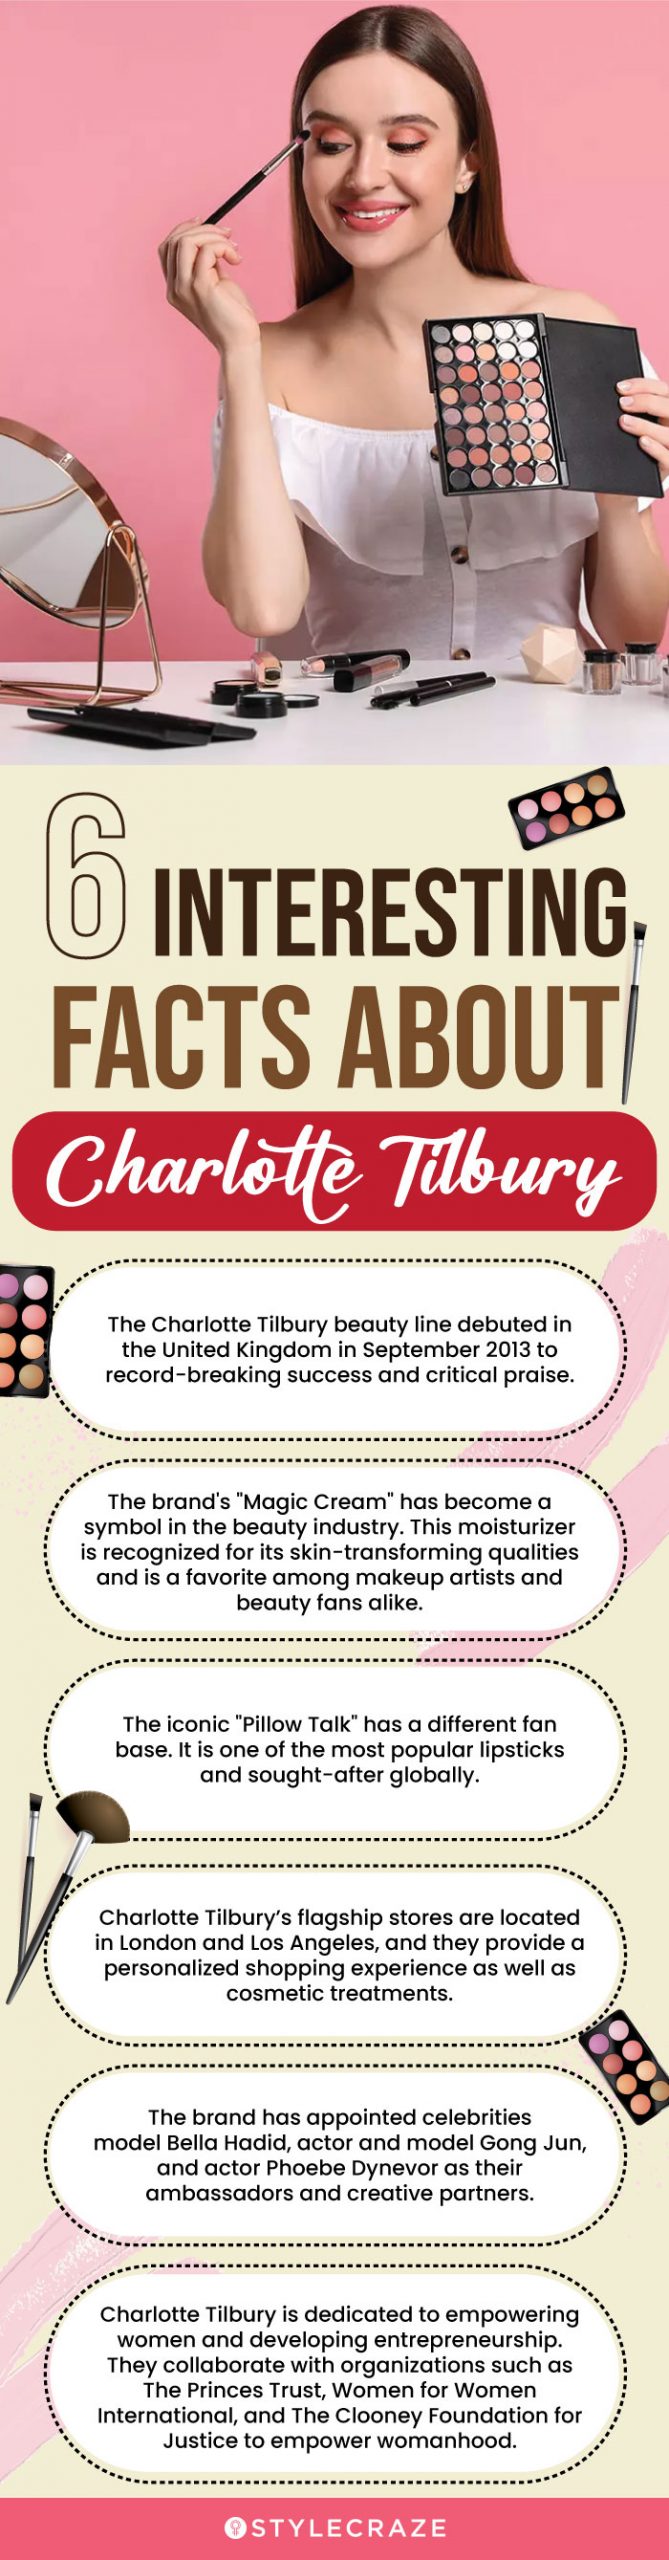 6 Interesting Facts About Charlotte Tilbury (infographic)